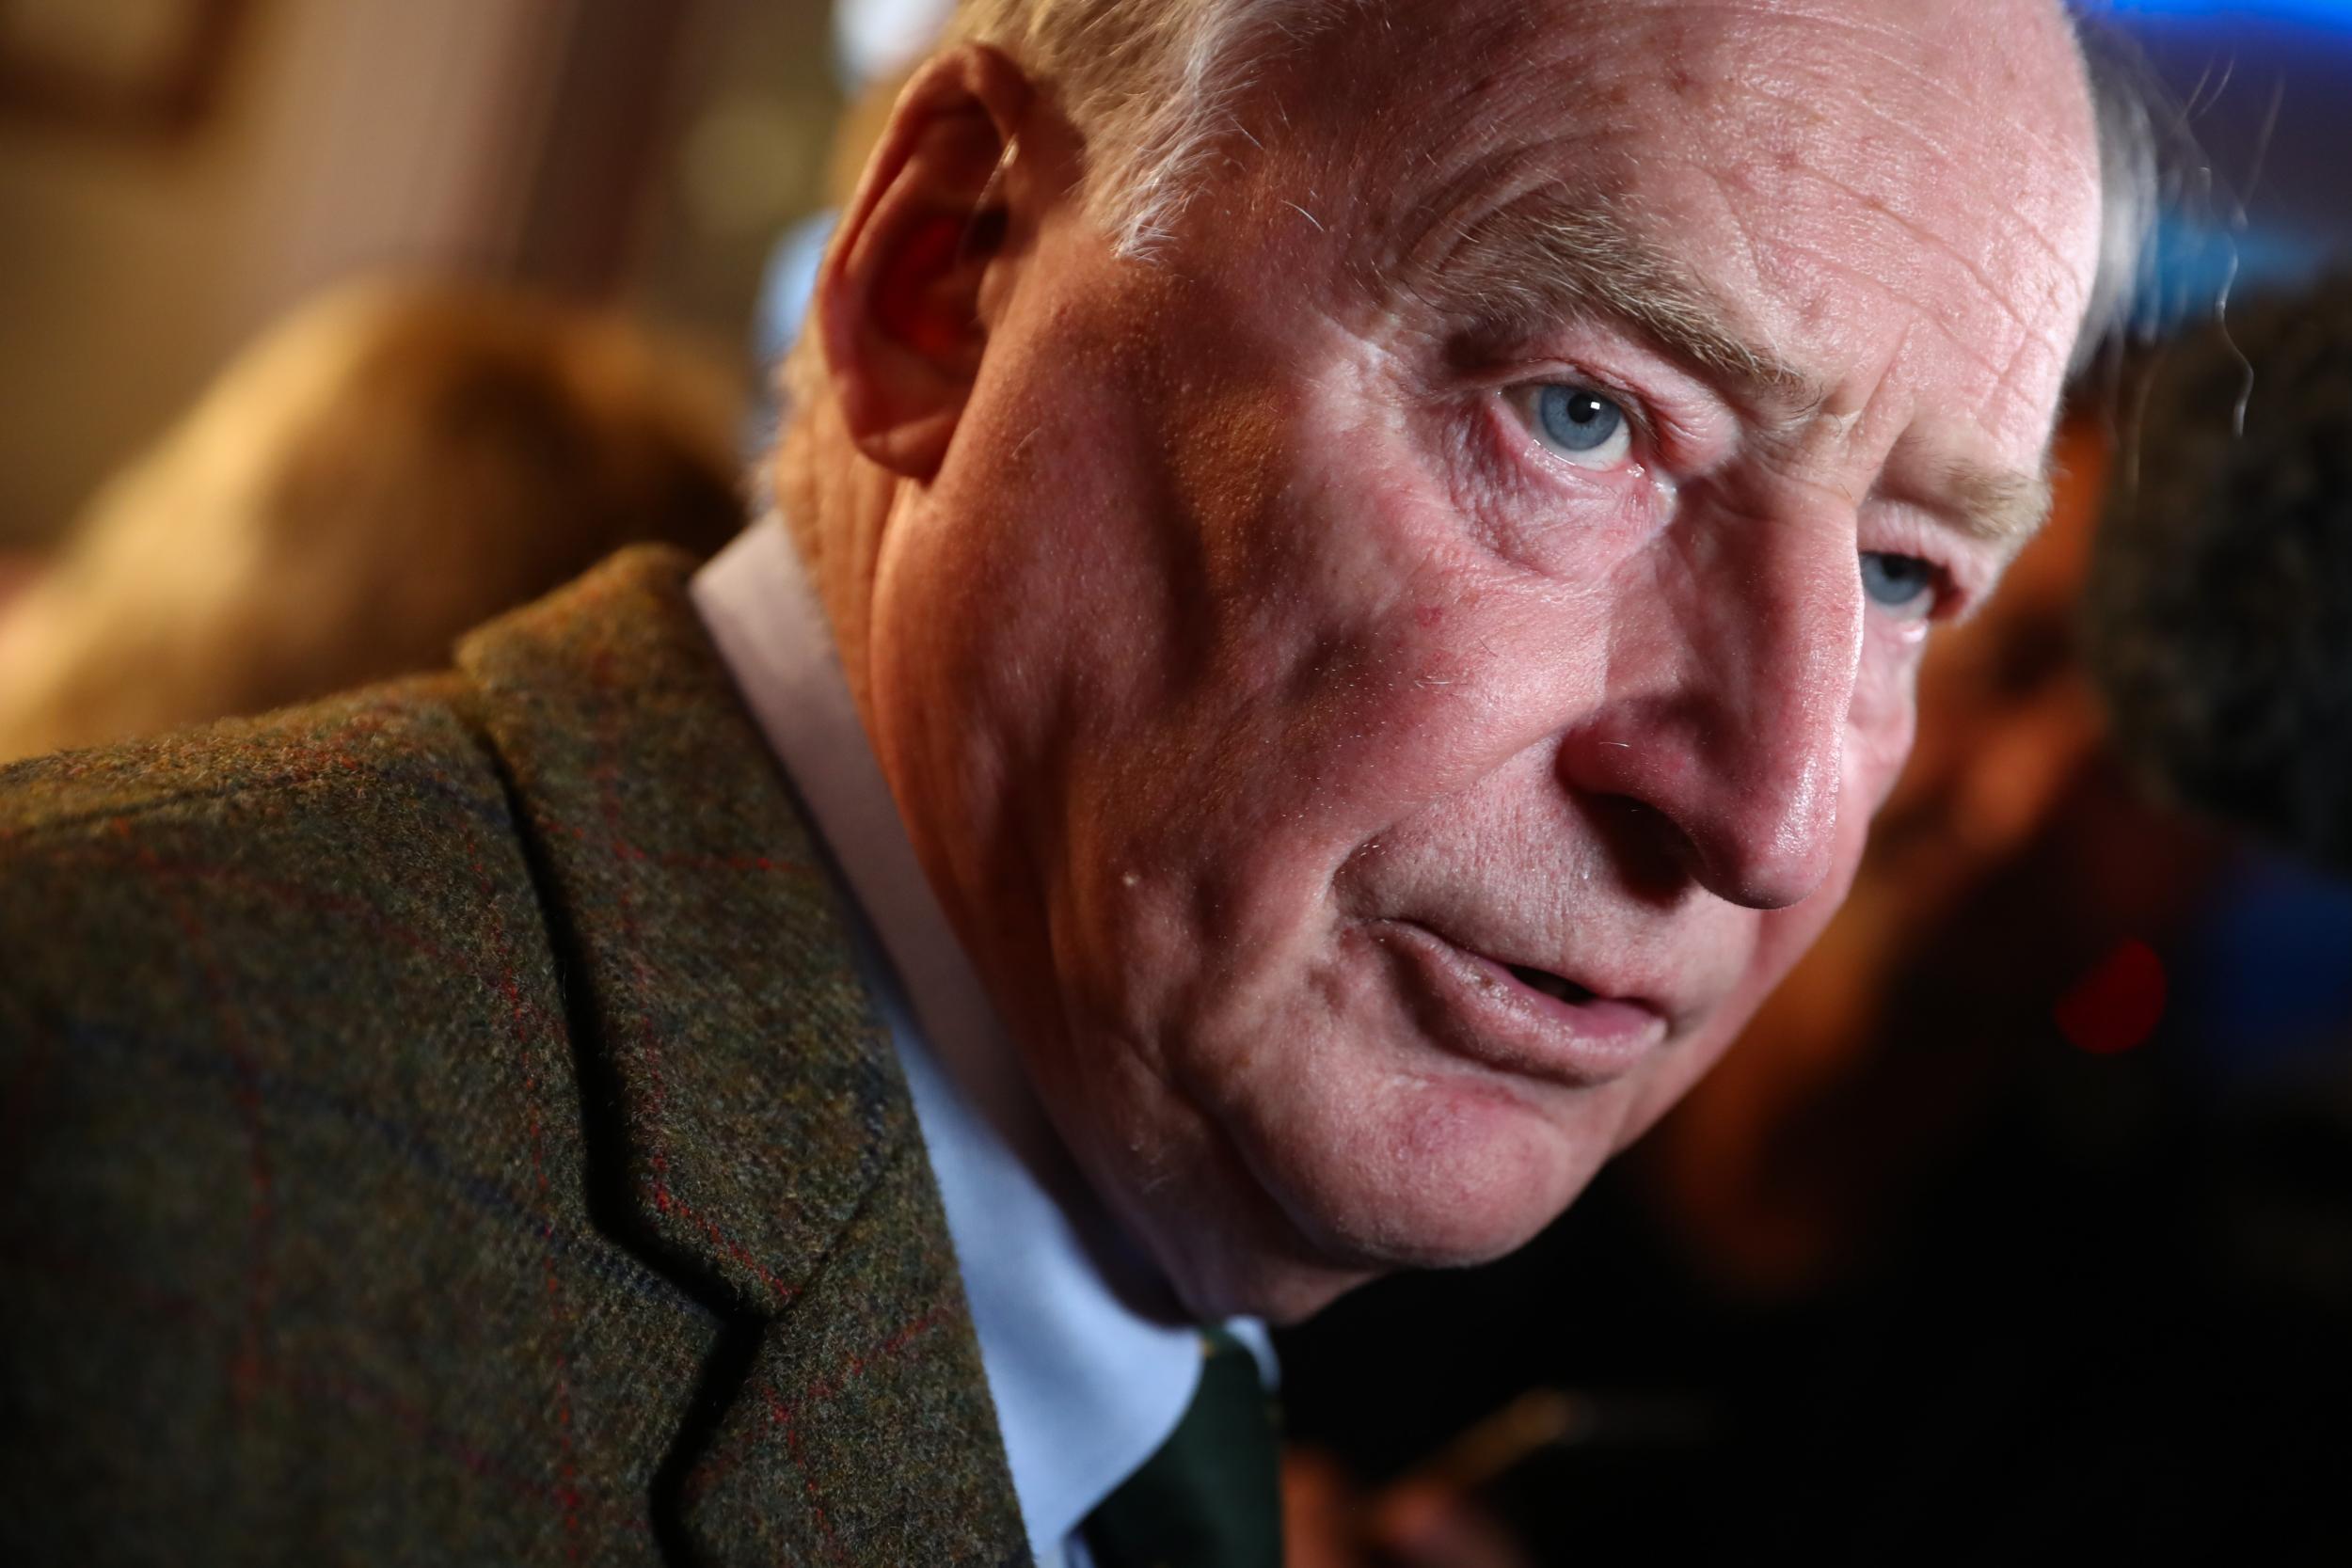 Mr Gauland was a lead candidate of Alternative for Germany (AfD), which won 12.6 per cent of the vote